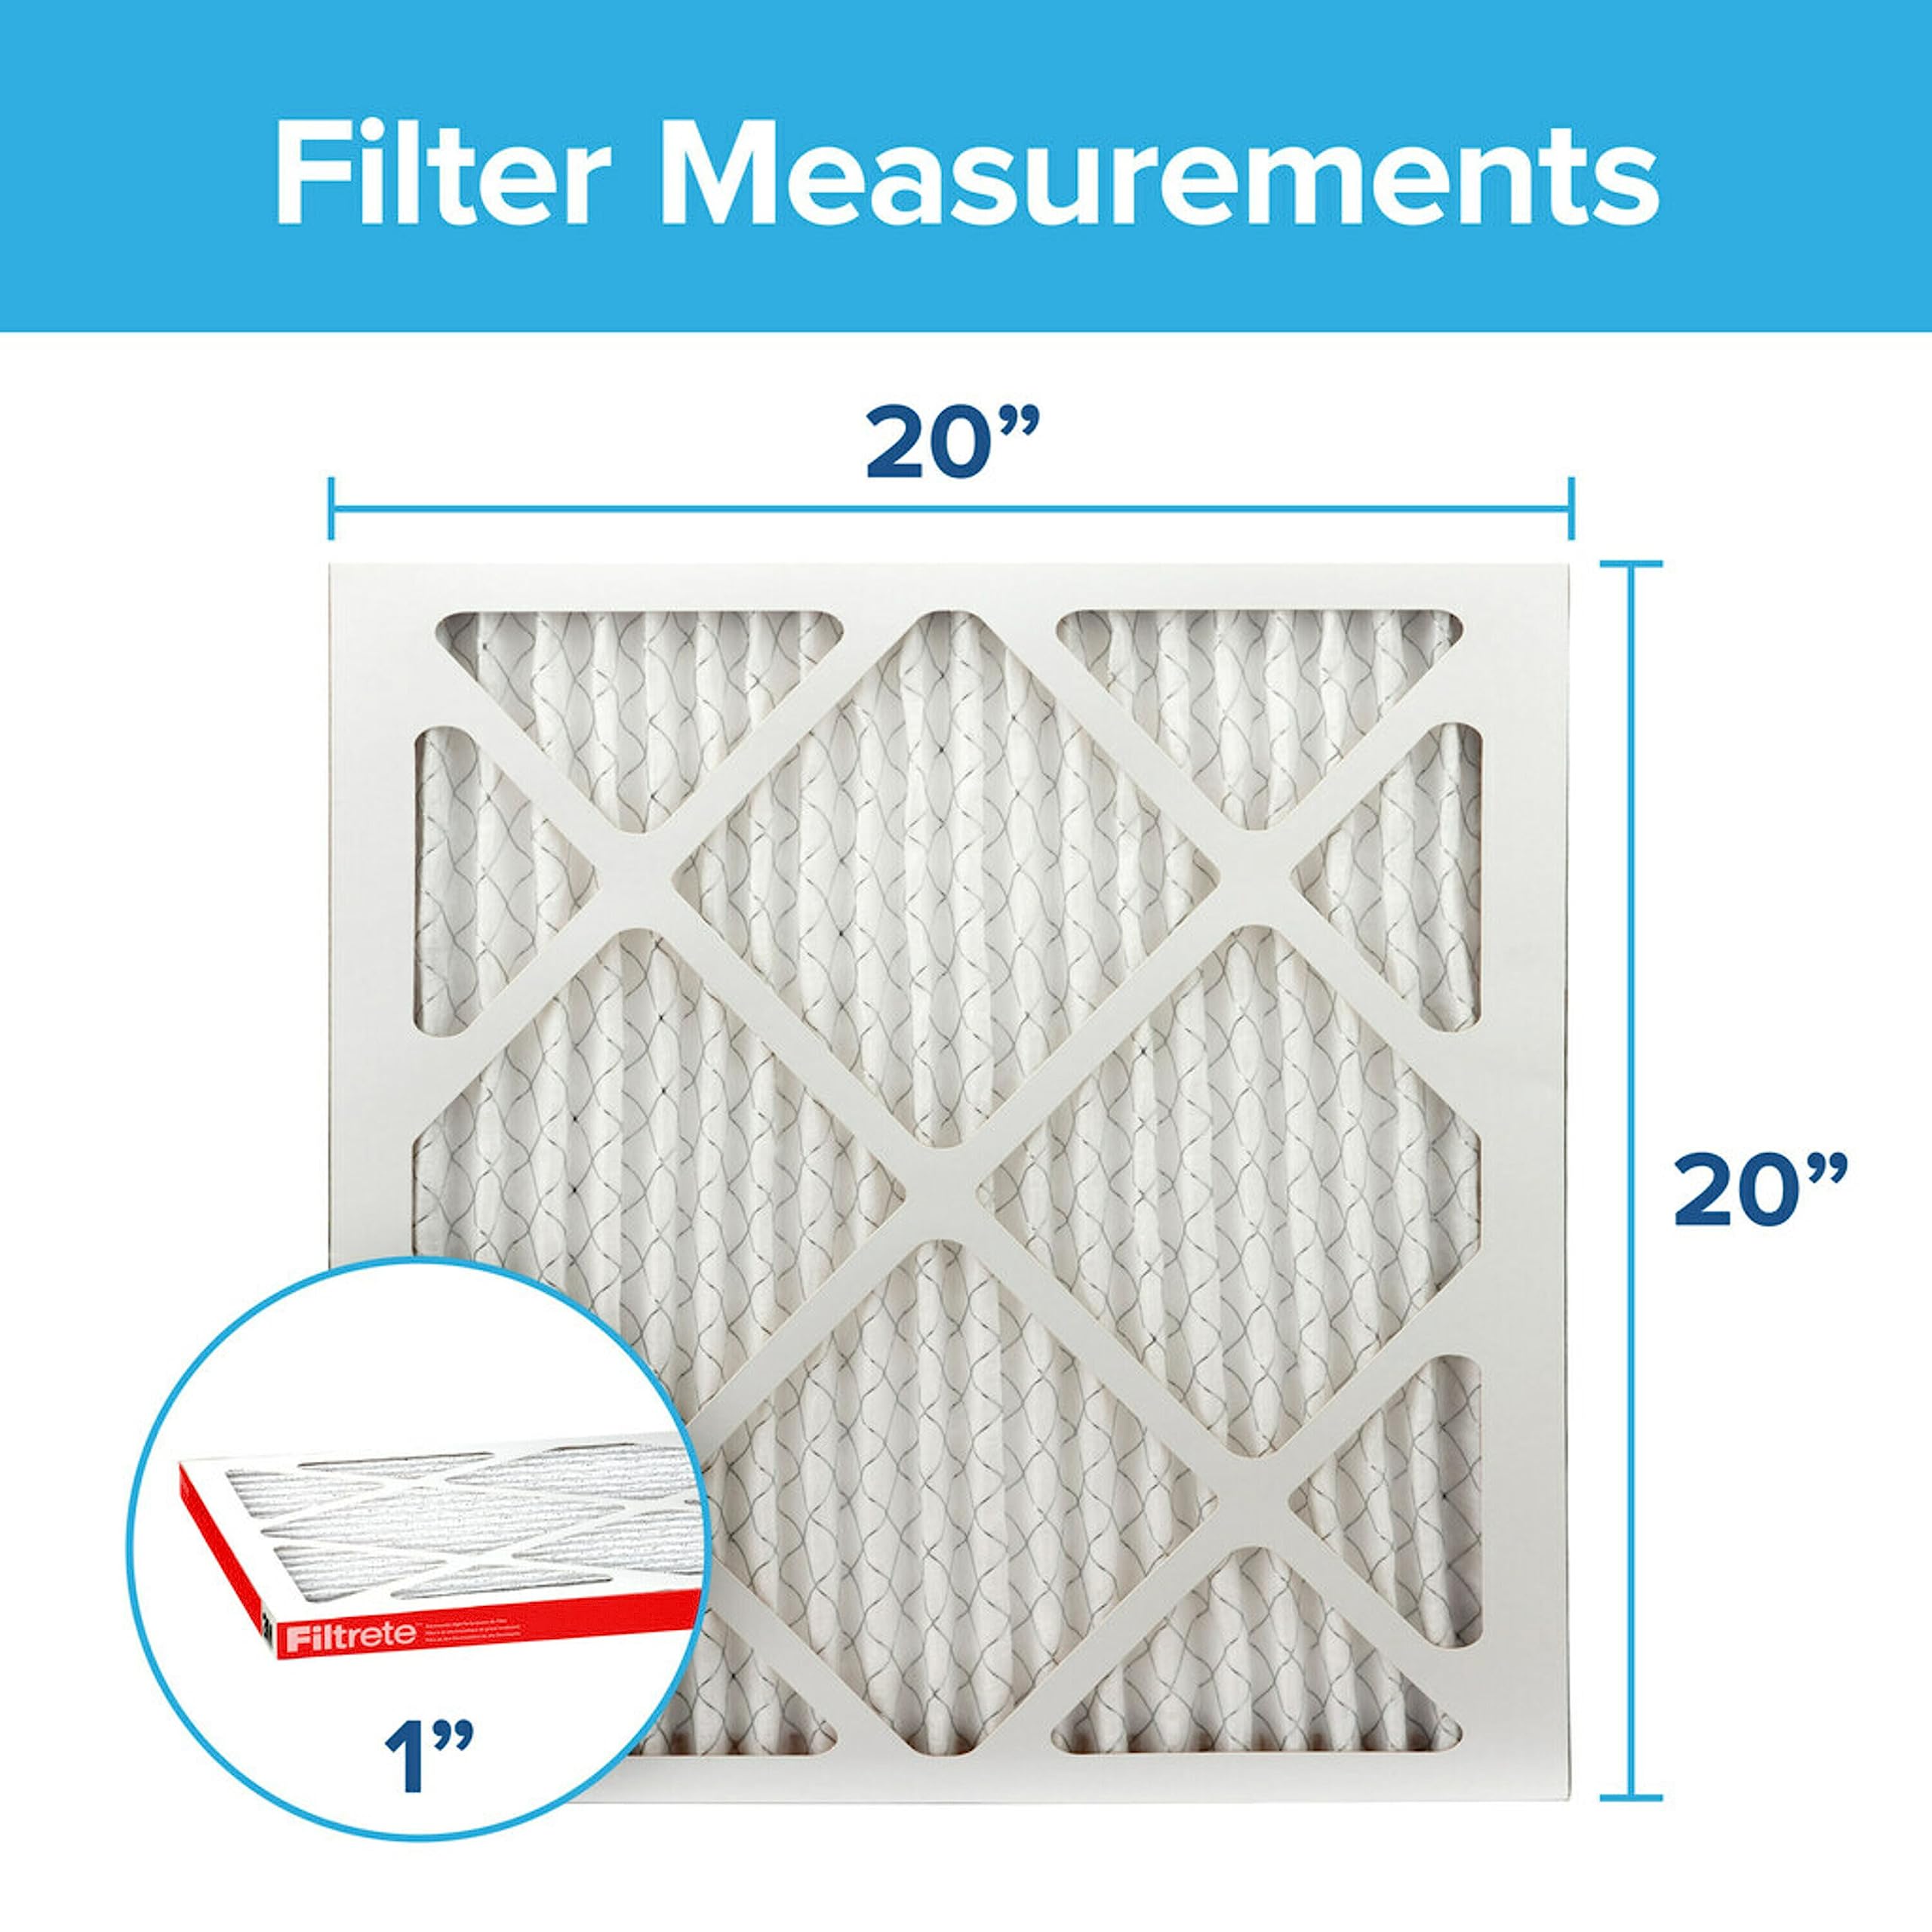 Filtrete 20x20x1 Air Filter, MPR 1000, MERV 11, Micro Allergen Defense 3-Month Pleated 1-Inch Air Filters, 2 Filters